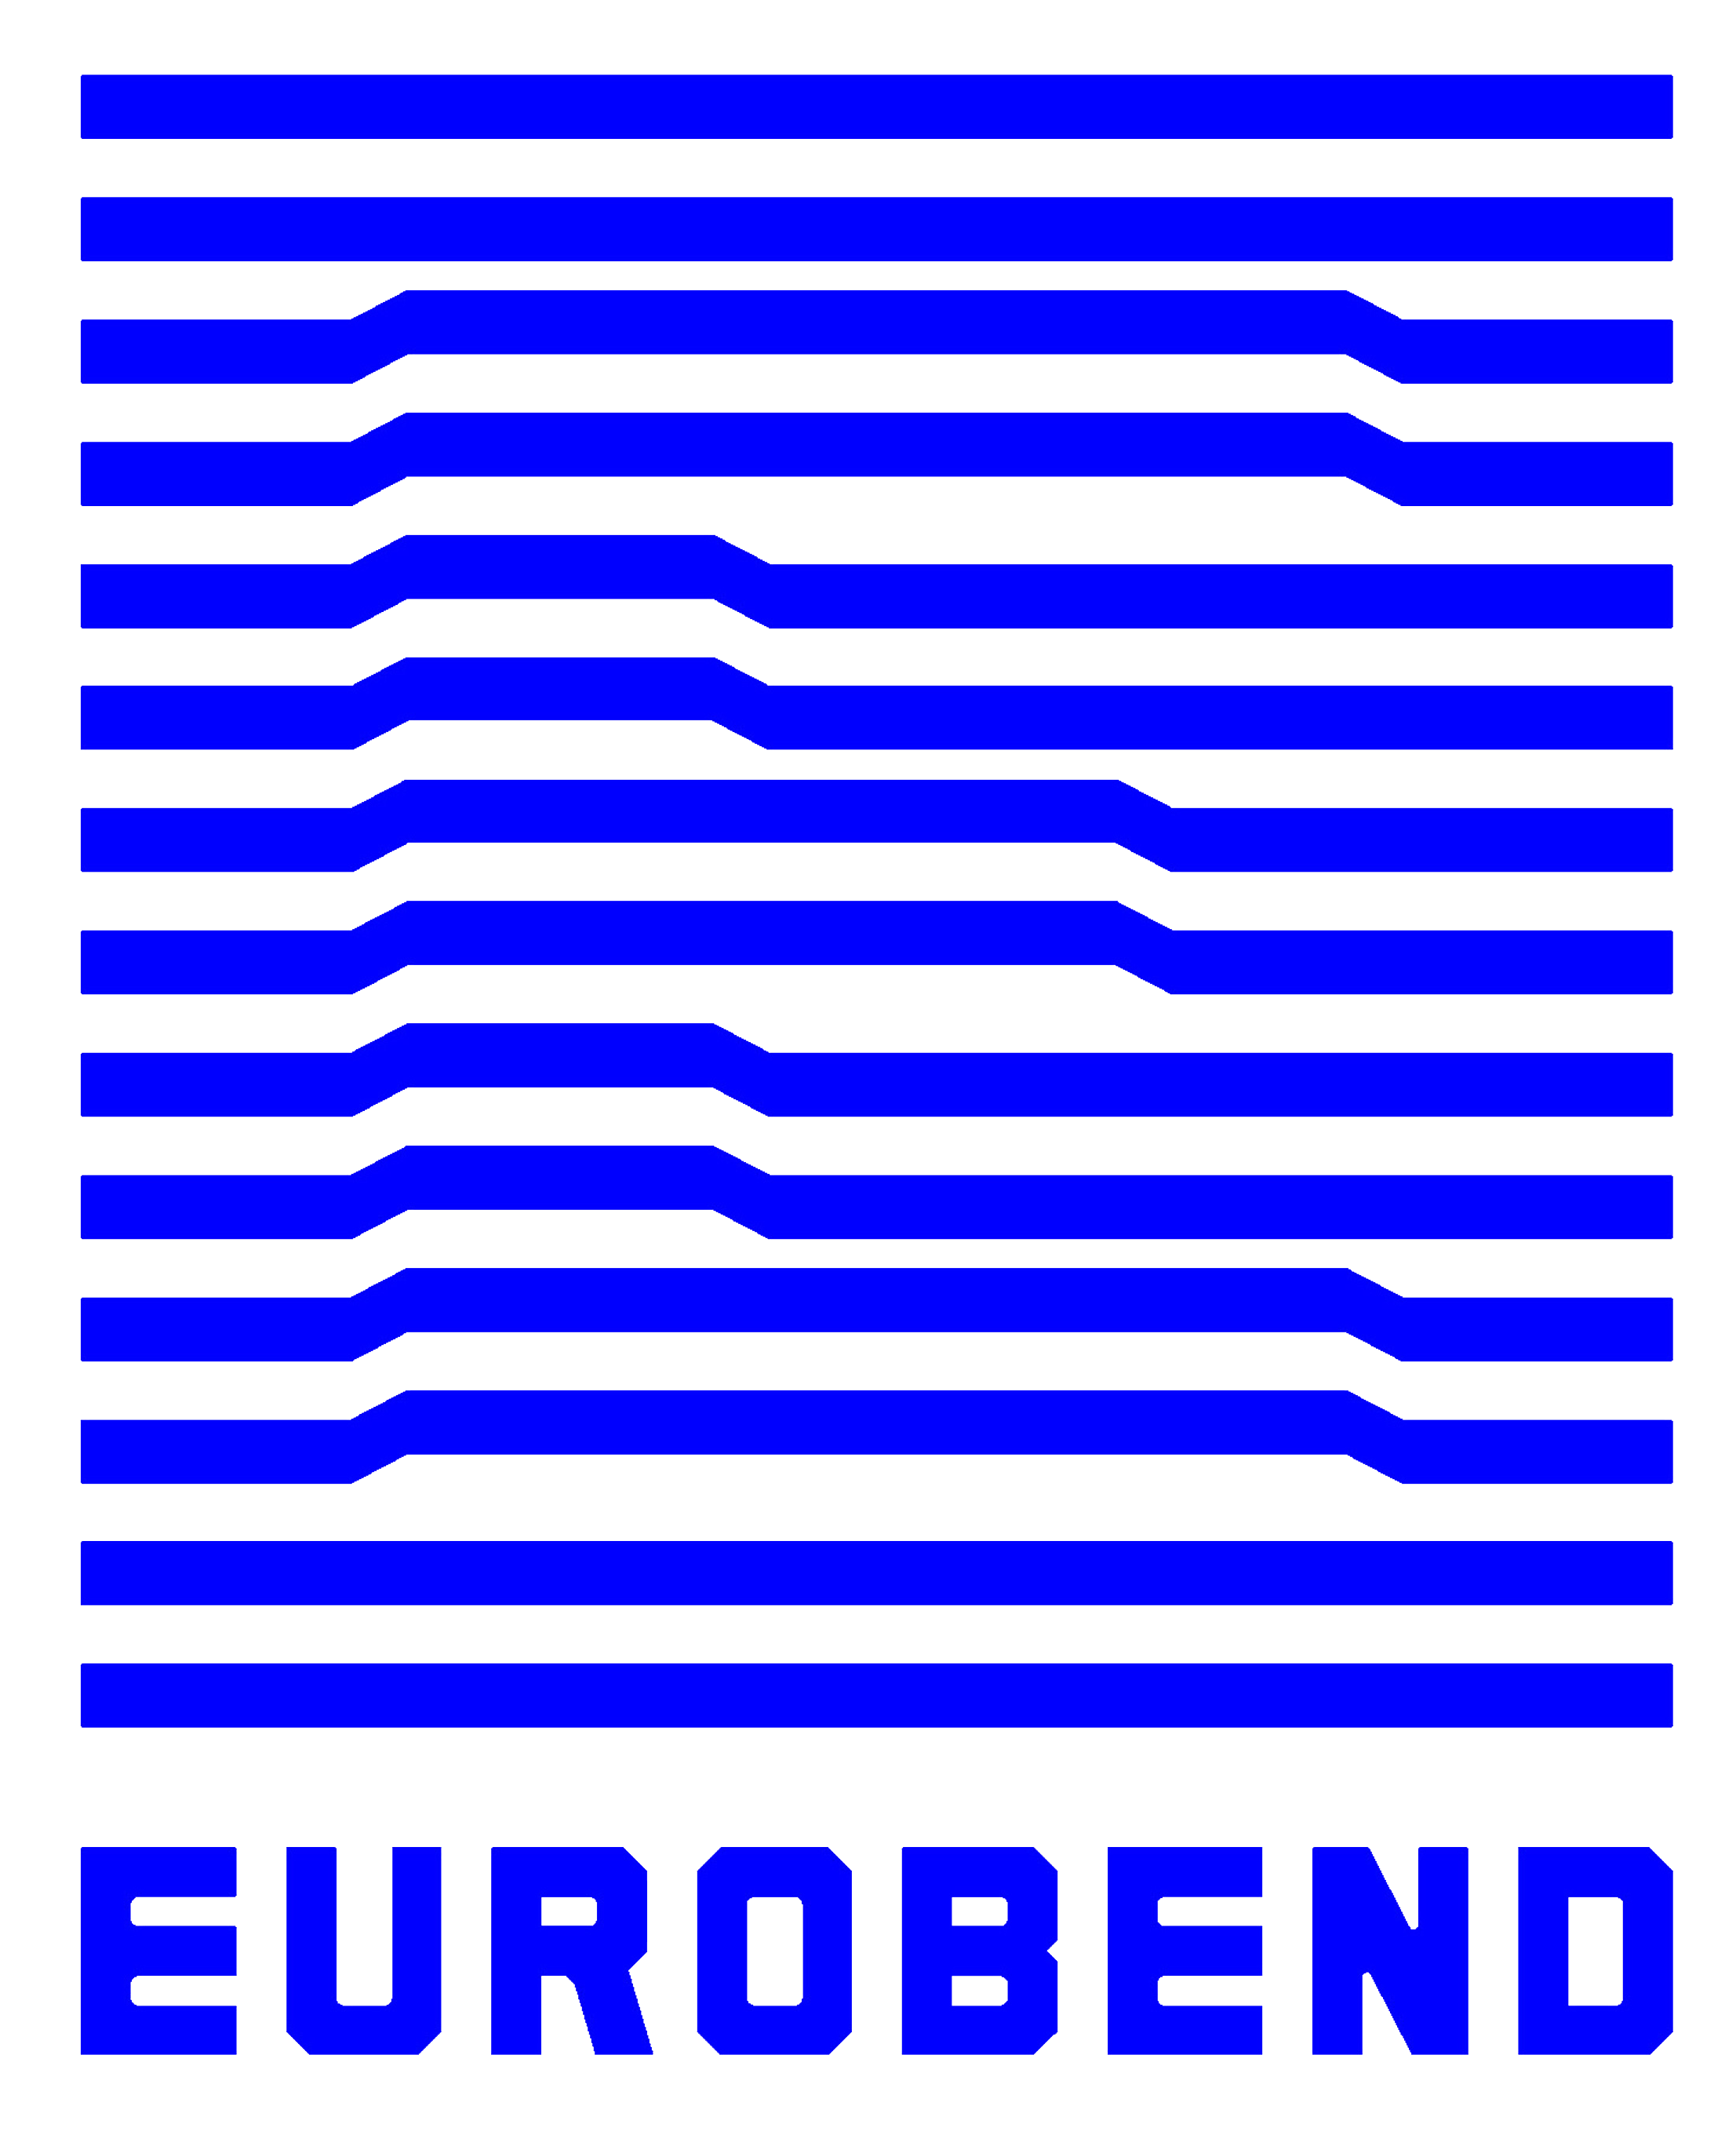 EUROBEND - Manufacturing of Advanced Machinery